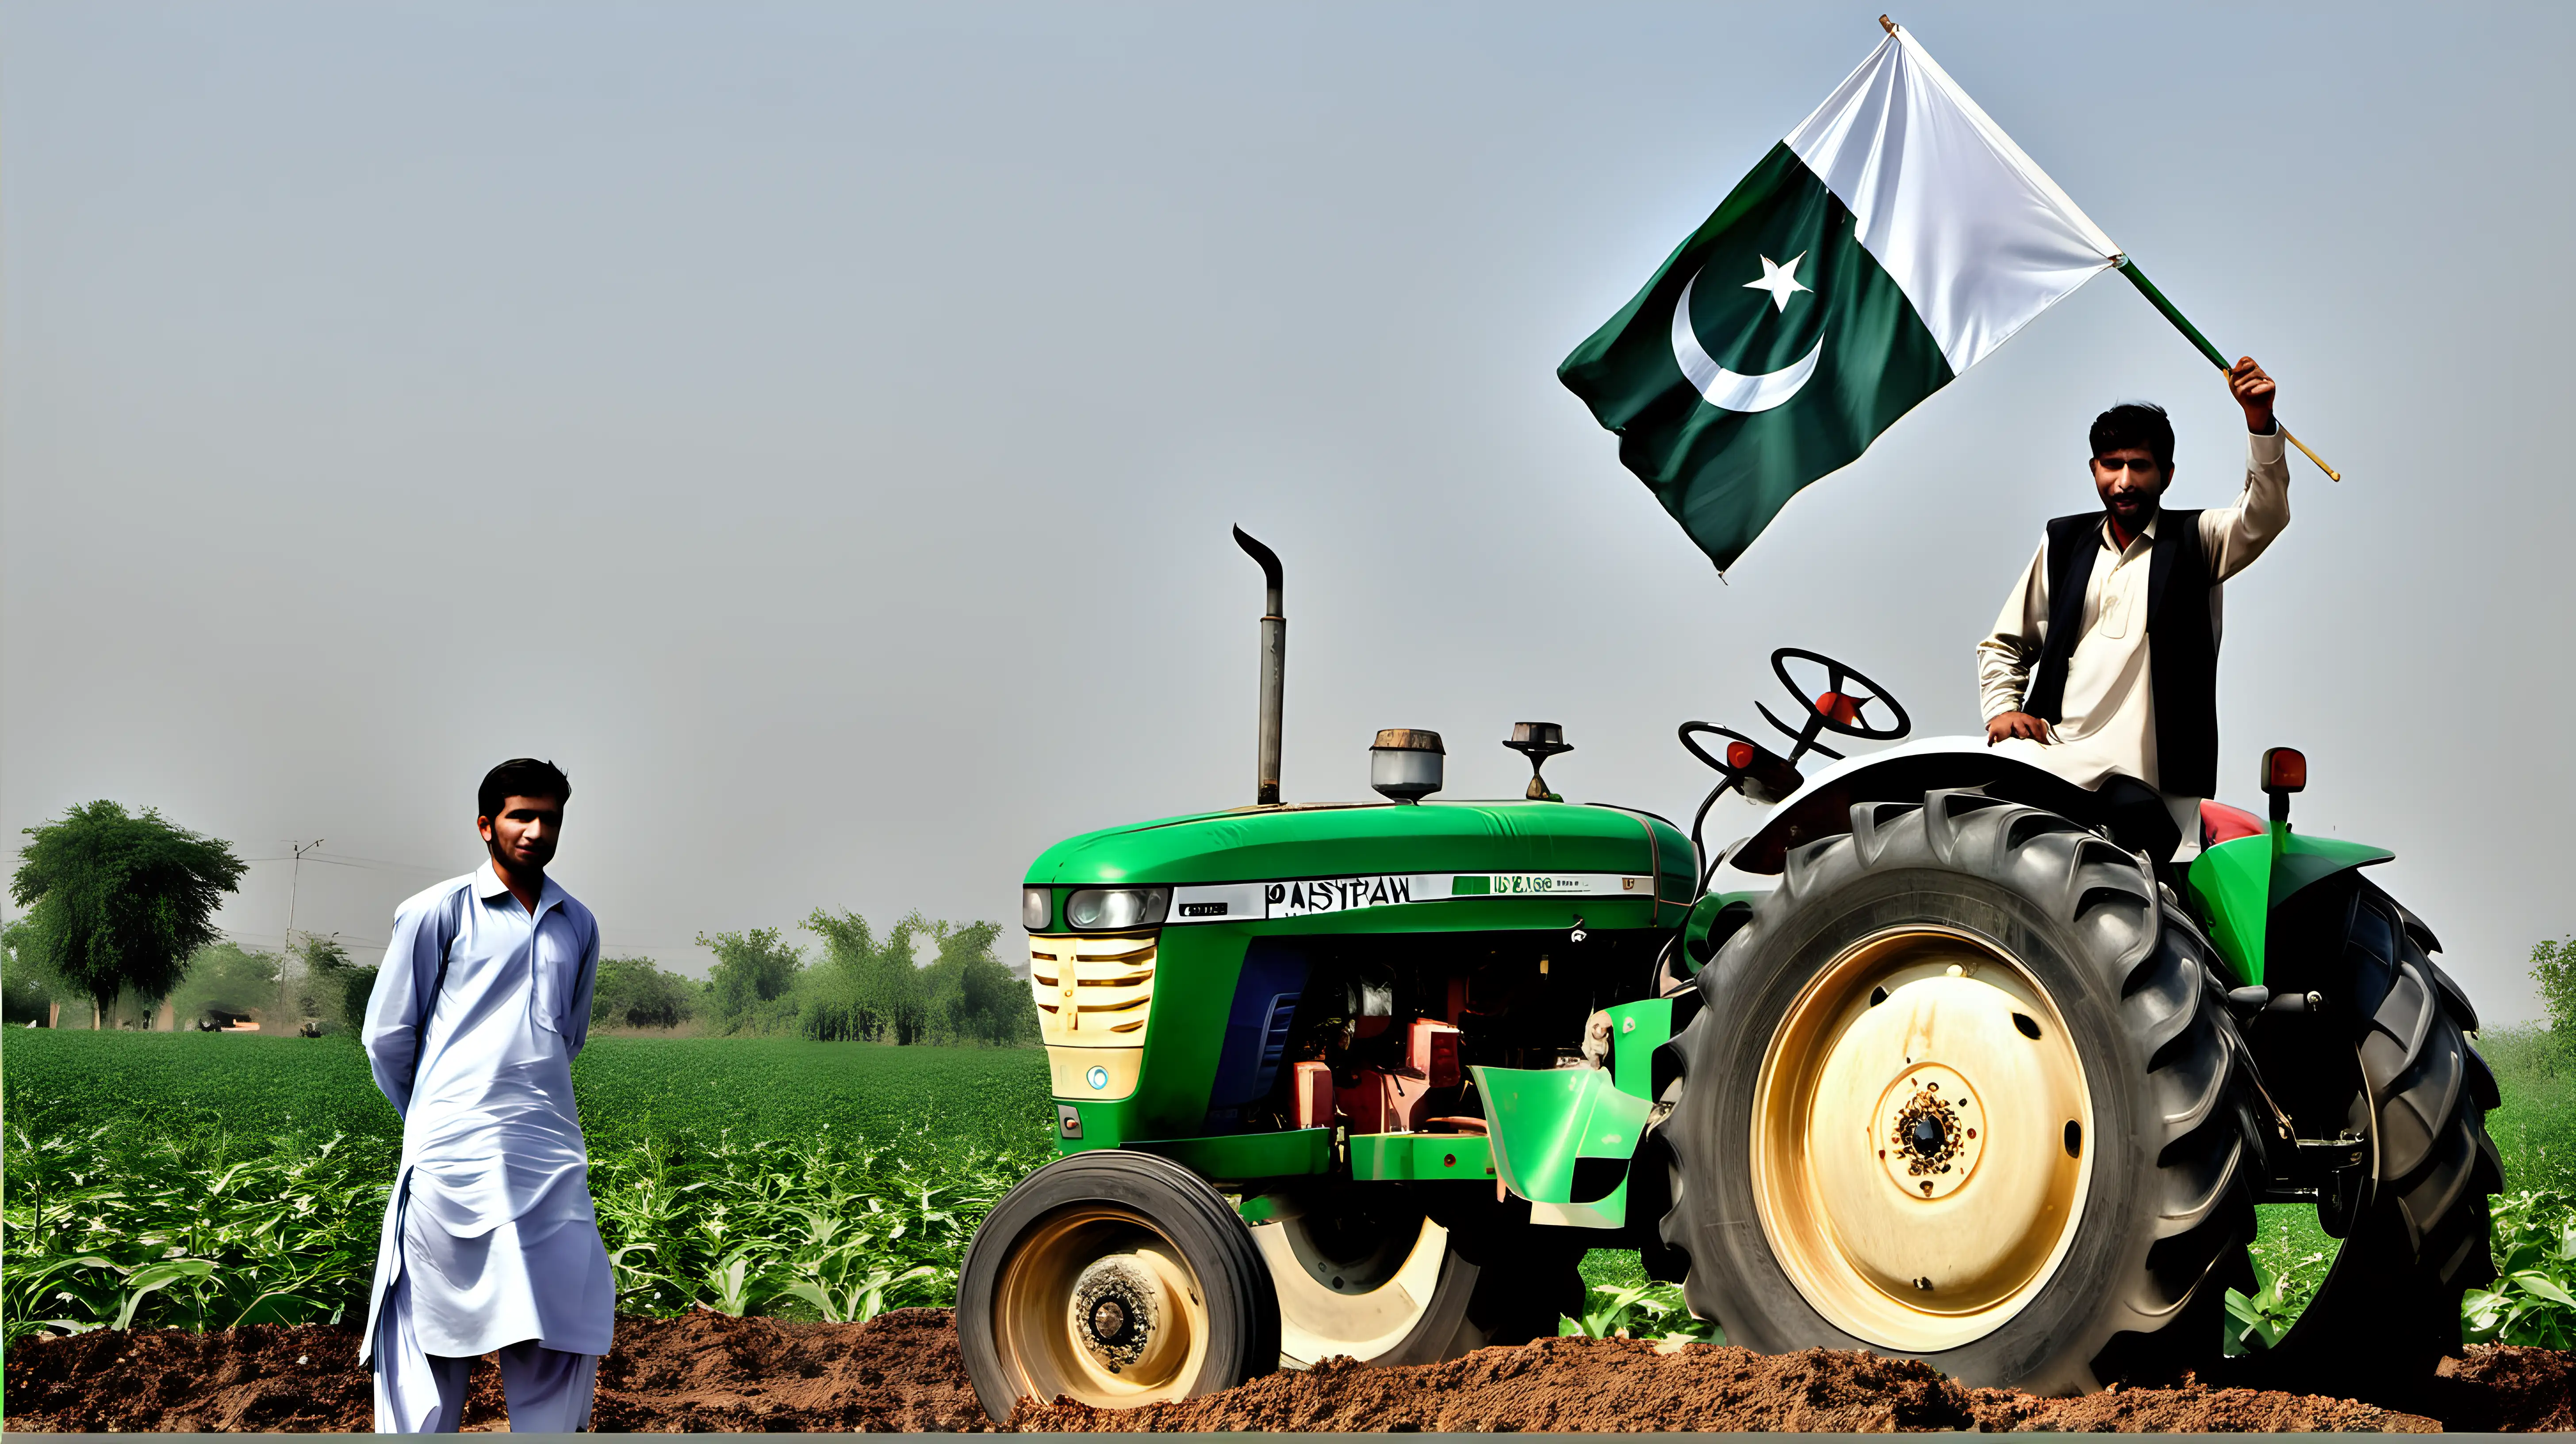 Pakistani Farmer Proudly Displays National Flag on Tractor